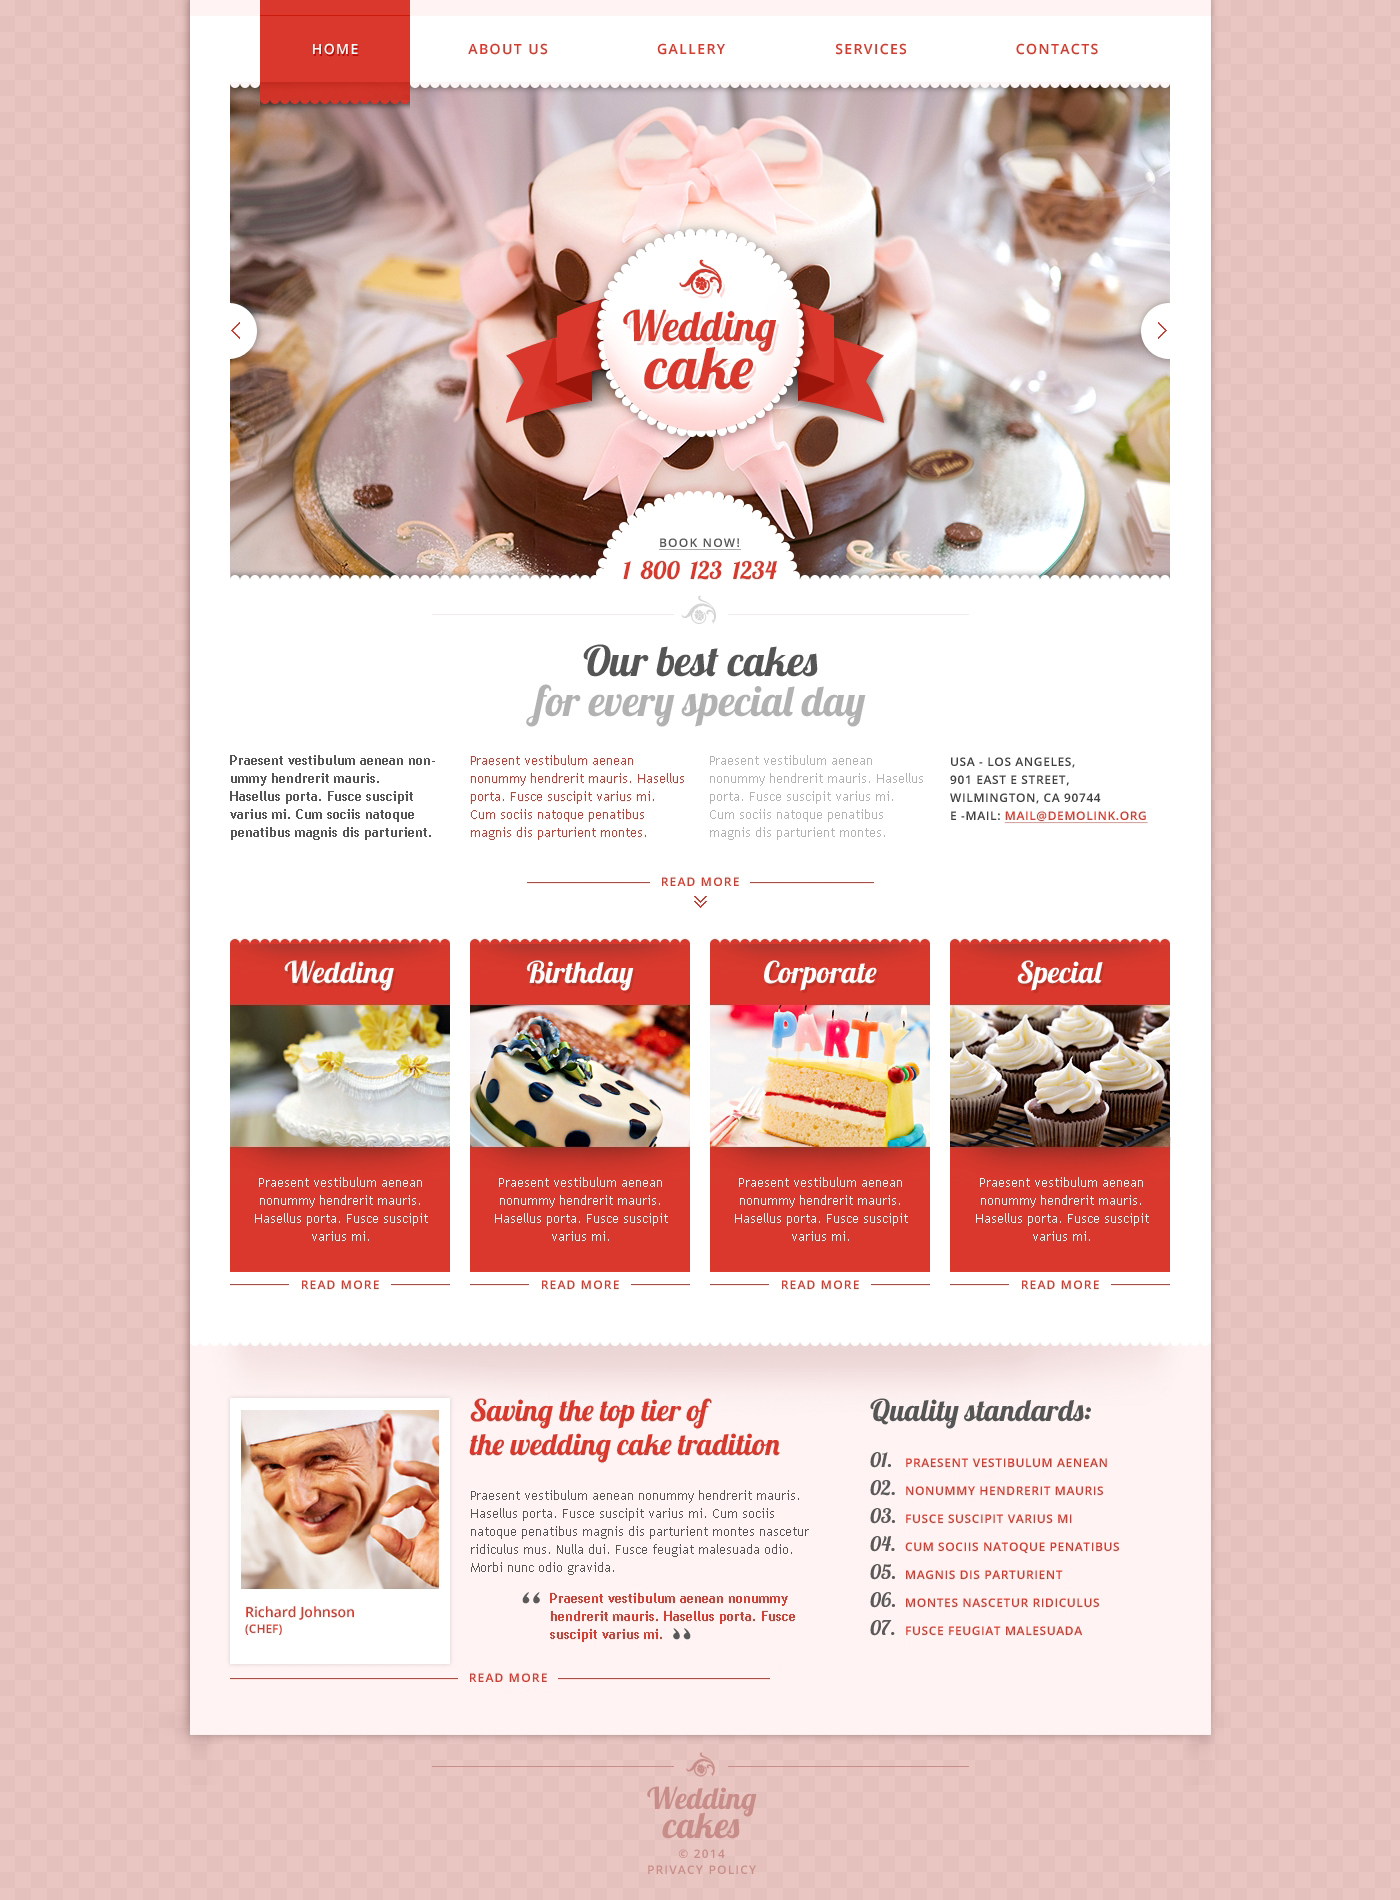 Wix Website Template for Bakery, Pink and Red Website, Feminine Website  Template for Custom Cakes, Cookies, Cupcakes, Website Design Wix - Etsy